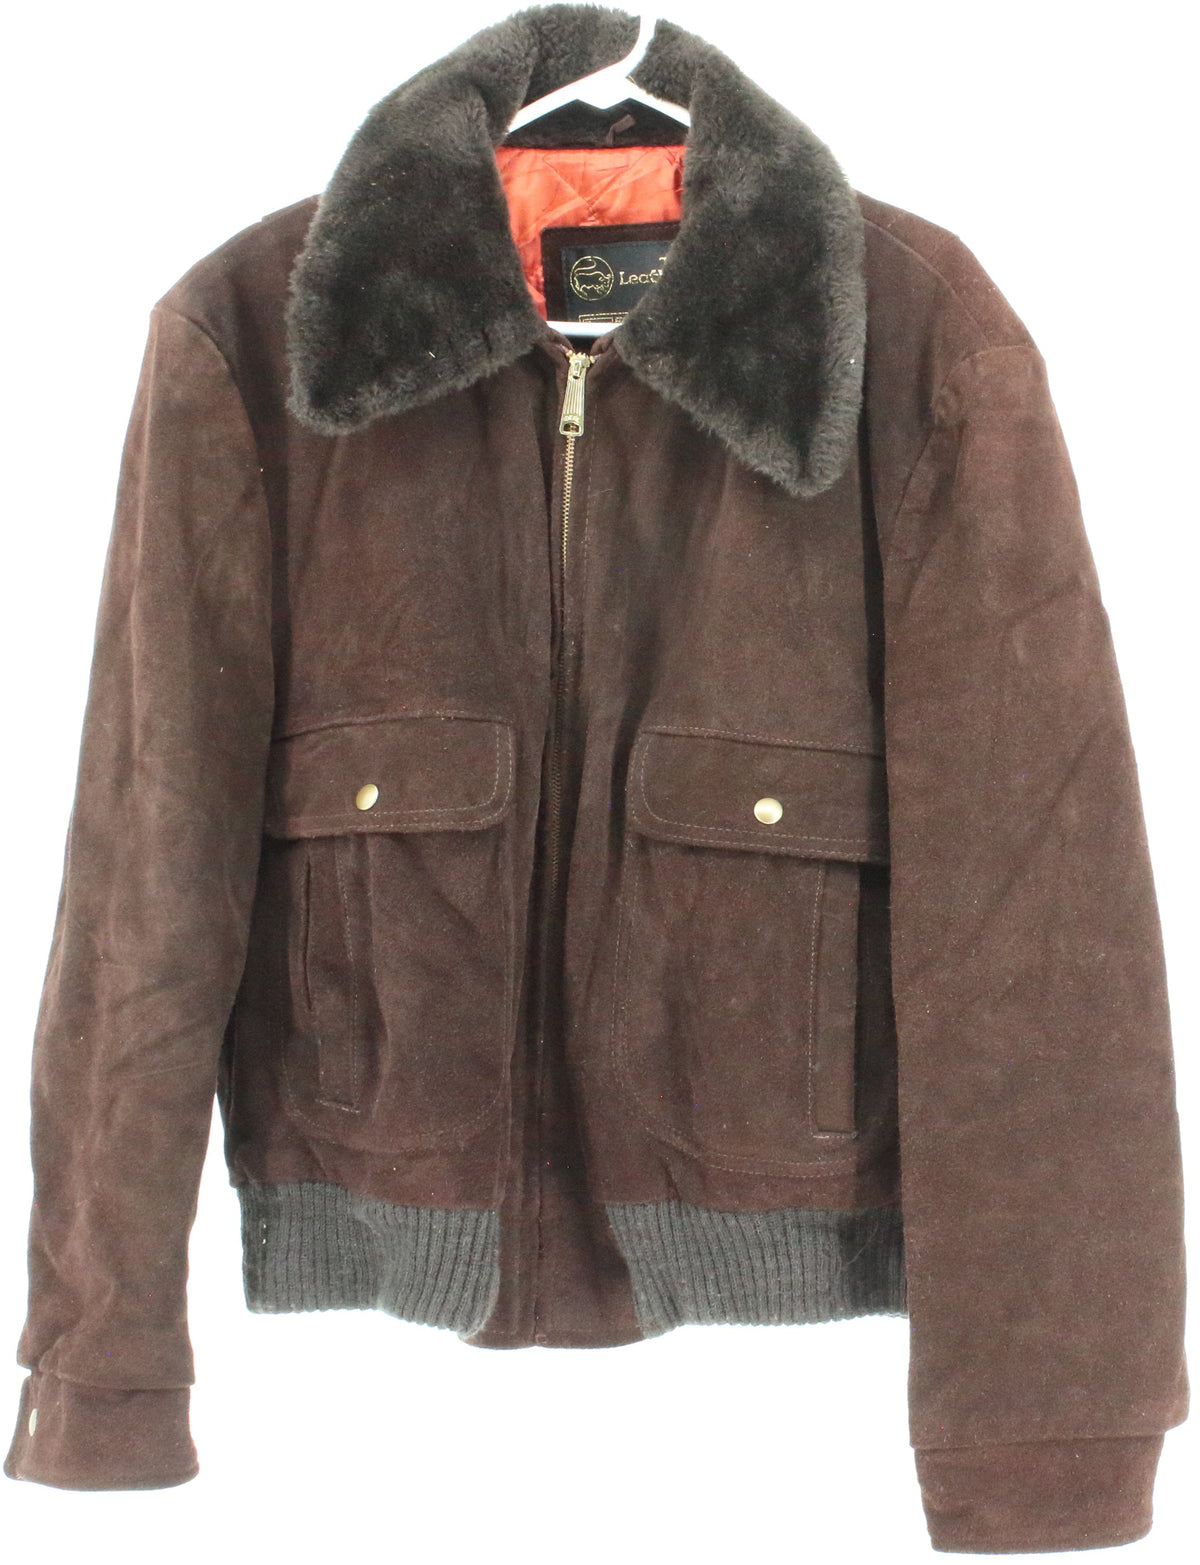 The Leather Shop Brown Bomber Leather Jacket